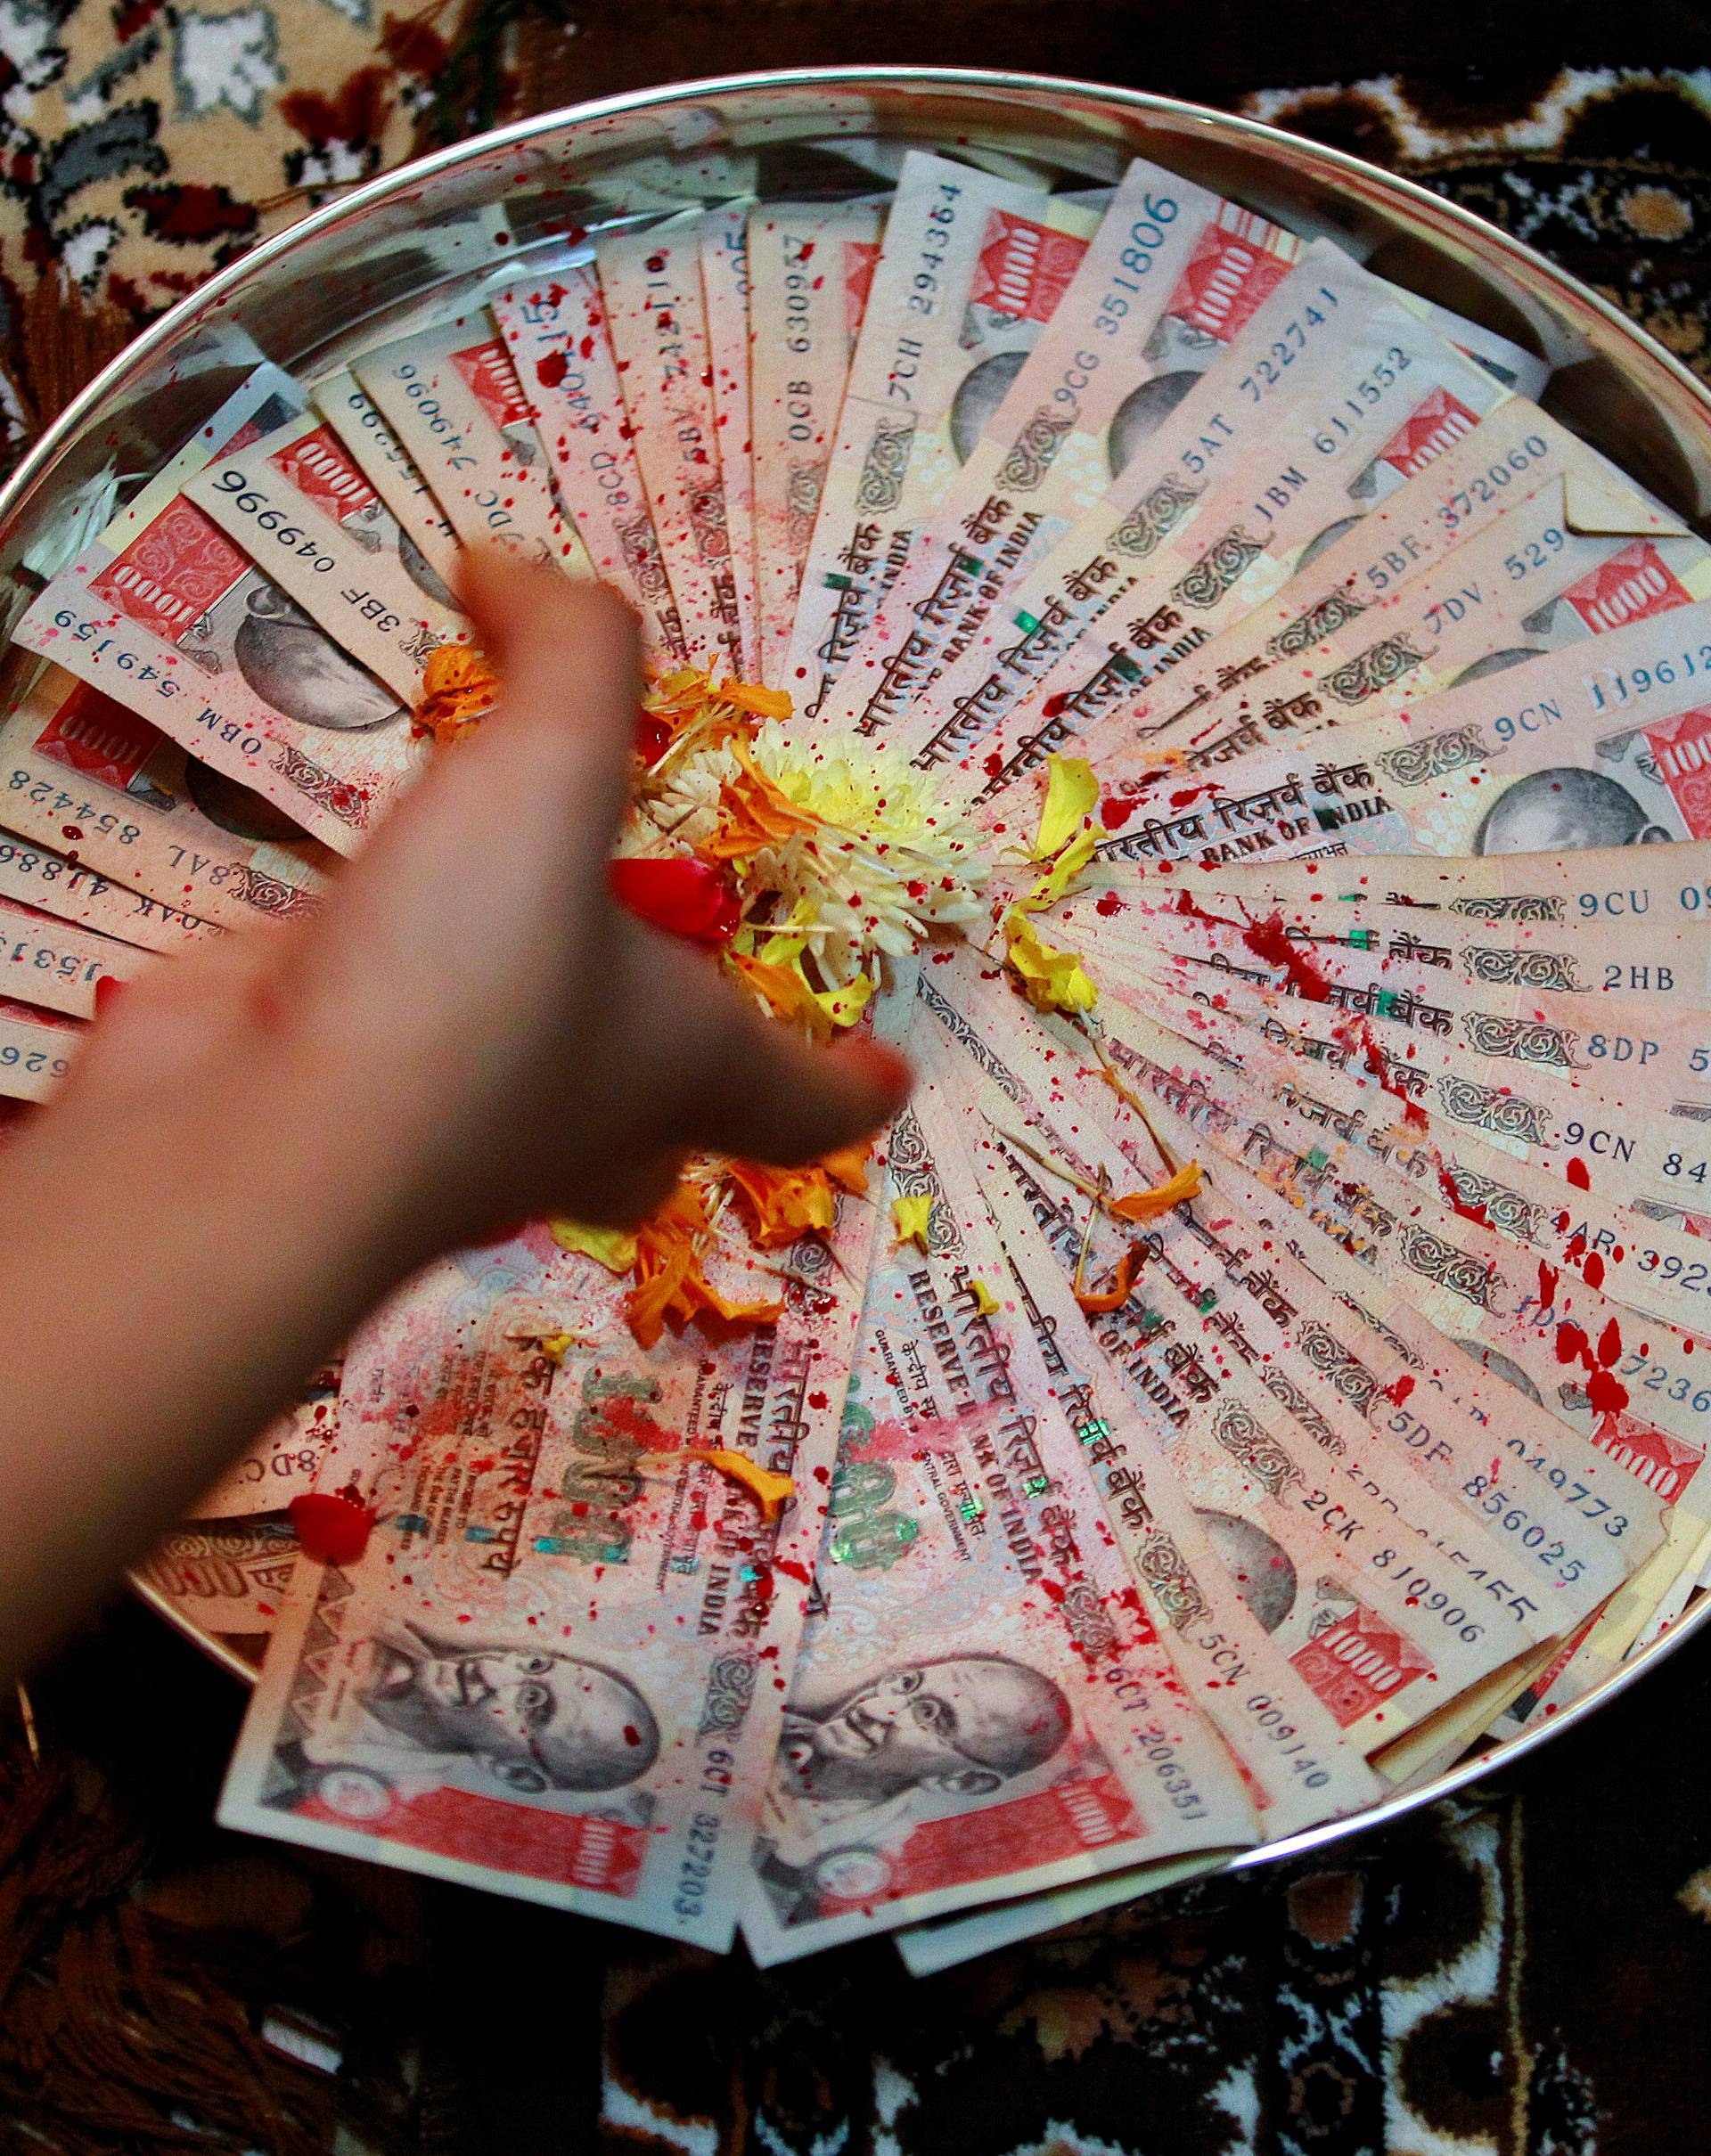 A woman puts flower petals on 1000 Indian rupee notes as she prays as part of a ritual during Dhanteras in Ahmedabad